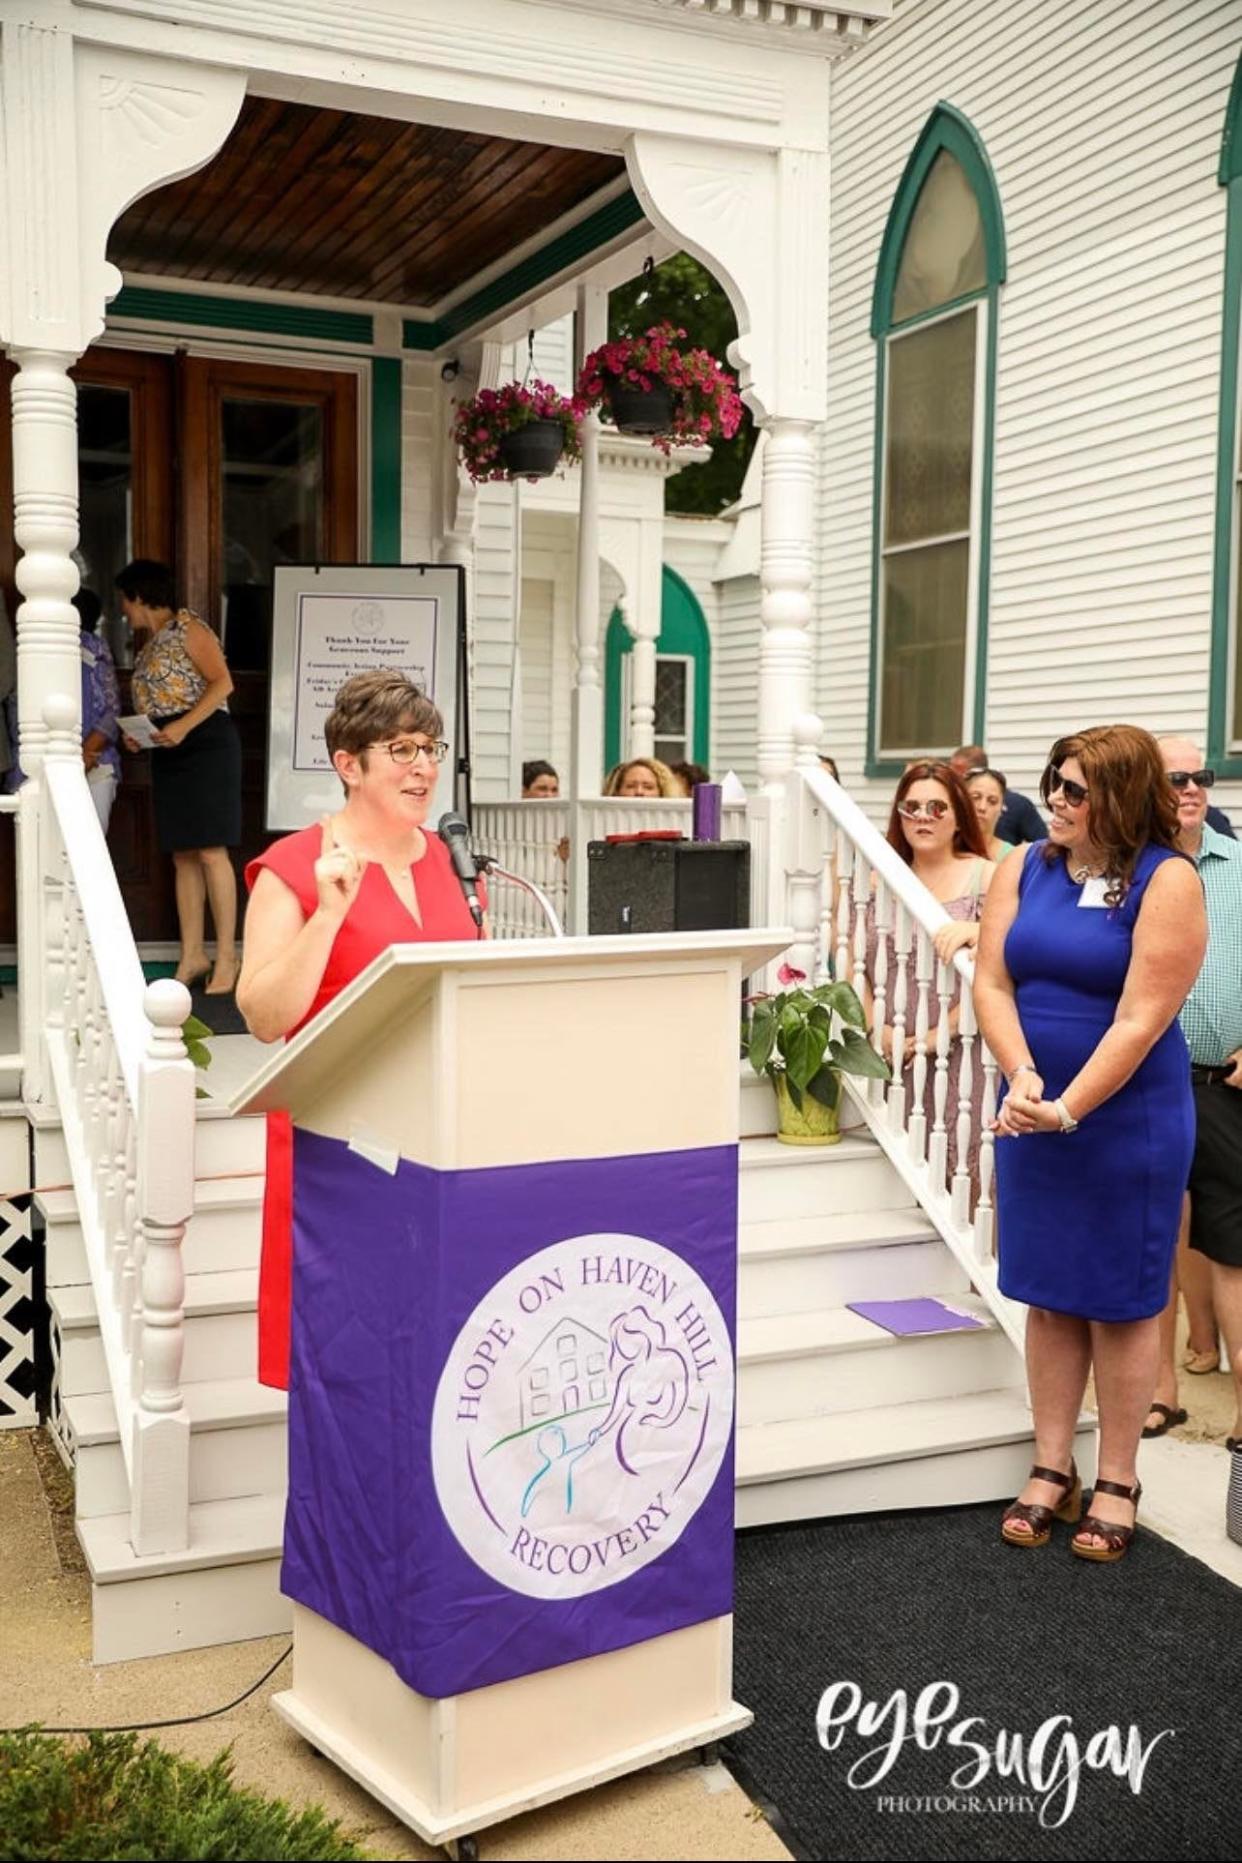 Kerry Norton, Executive Director of Hope on Haven Hill listens as Betsey Andrews Parker, CEO of Community Action Partnership of Strafford County, speaks at the dedication of Abi's Place.
(Photo: courtesy)